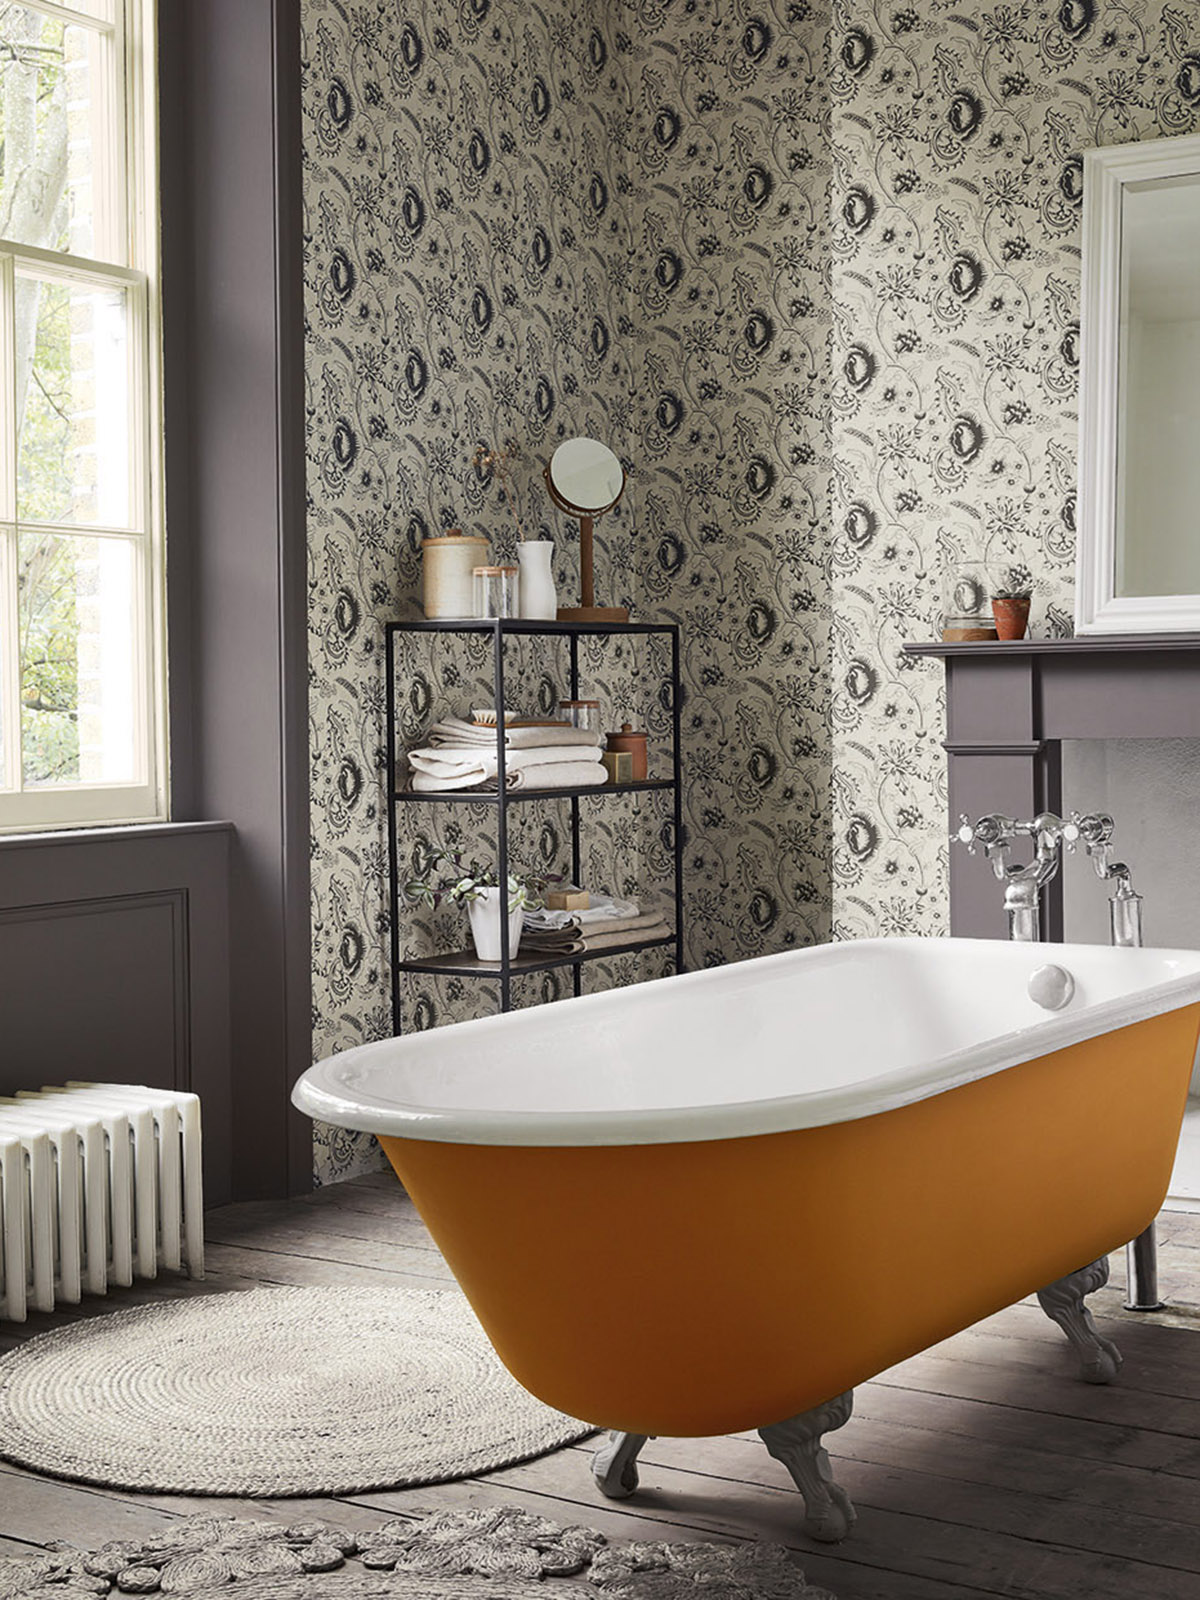 Downstairs toilet wallpaper ideas  give your room a boost  Ideal Home